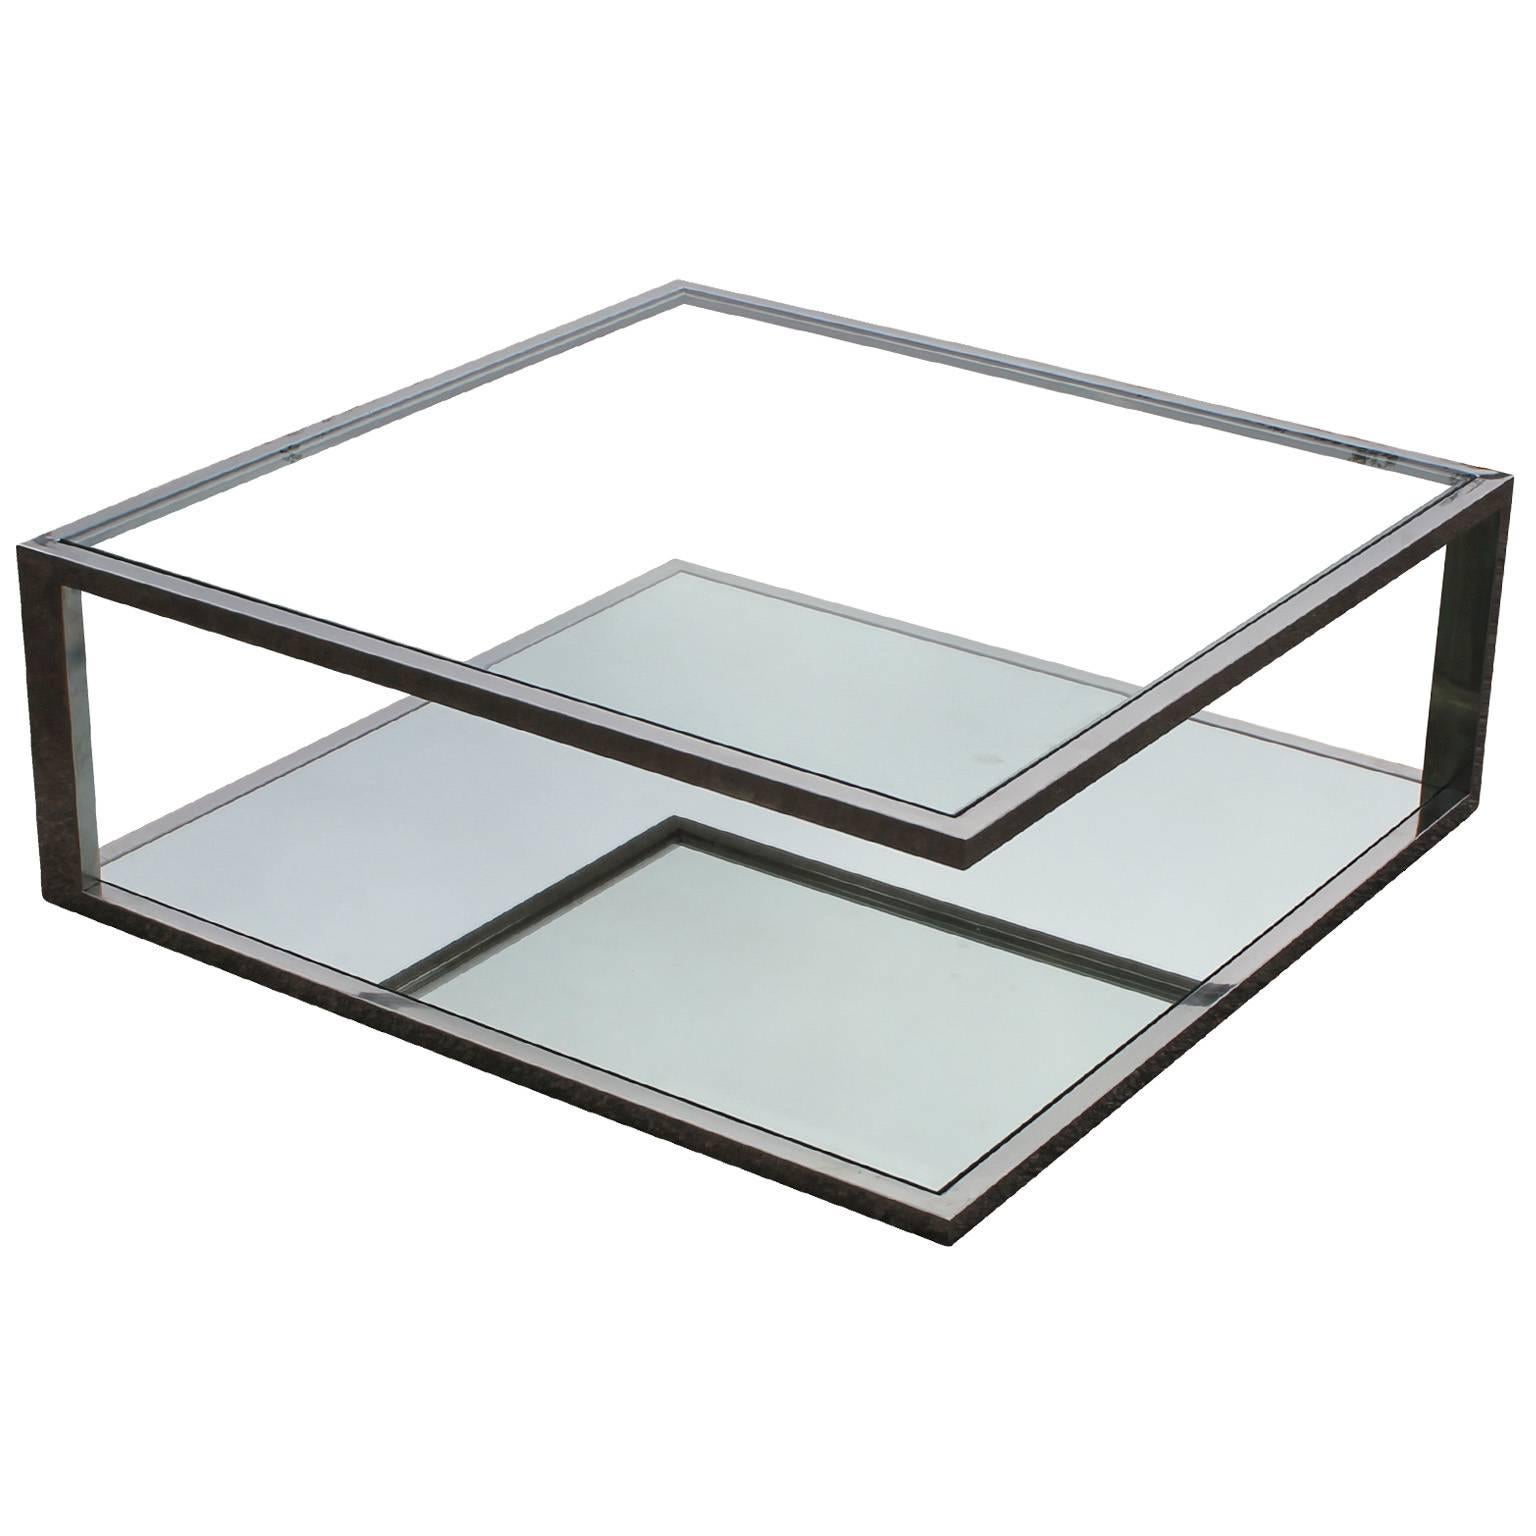 Wonderful angular modernist Chrome, Mirror, and Glass coffee table. The table is well constructed and adds interest from all angles. The top is supported by two chrome bars. The top is clear glass and the bottom is mirrored glass. In excellent